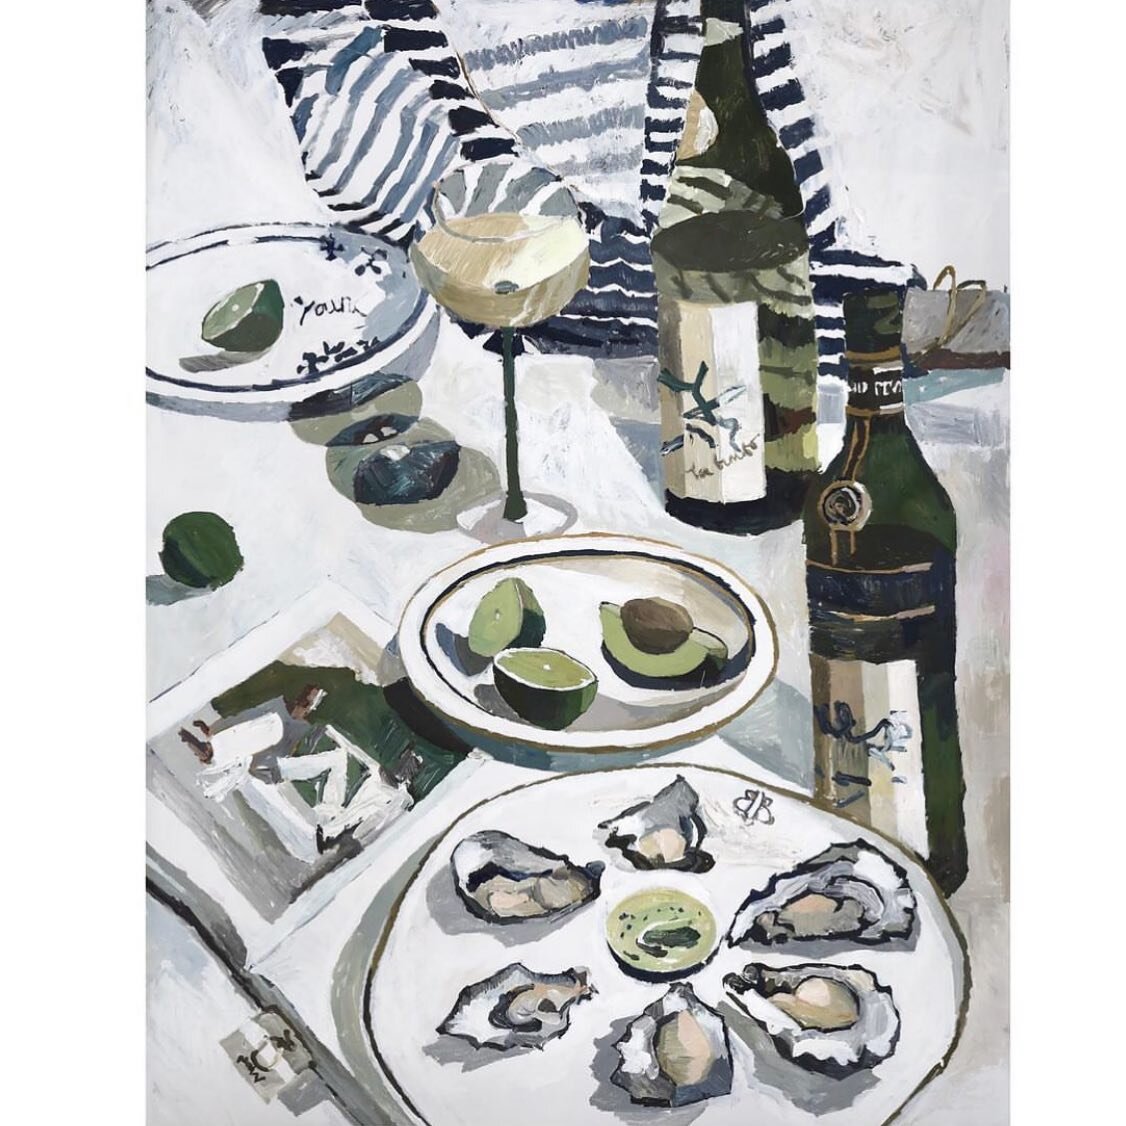 Sums up summers in France to me in many ways. Another beauty by Australian artist @z.y.o.e Sold so lucky whoever has this now hanging in their house 🦪 🍸 #zoeyoung #australianart